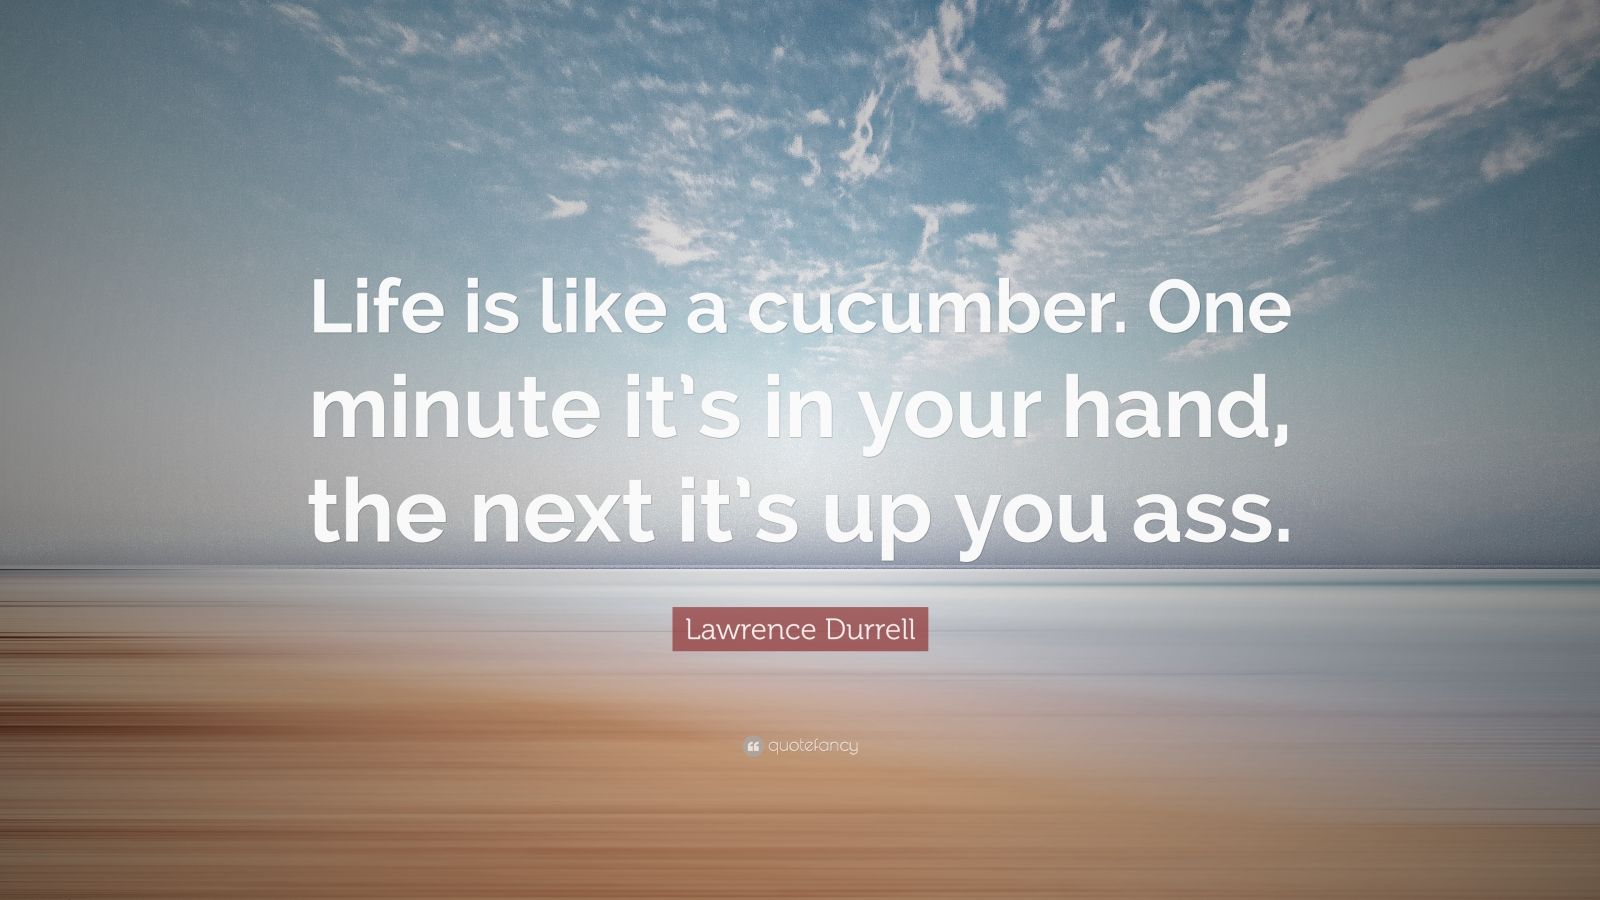 4333869-Lawrence-Durrell-Quote-Life-is-like-a-cucumber-One-minute-it-s-in.jpg